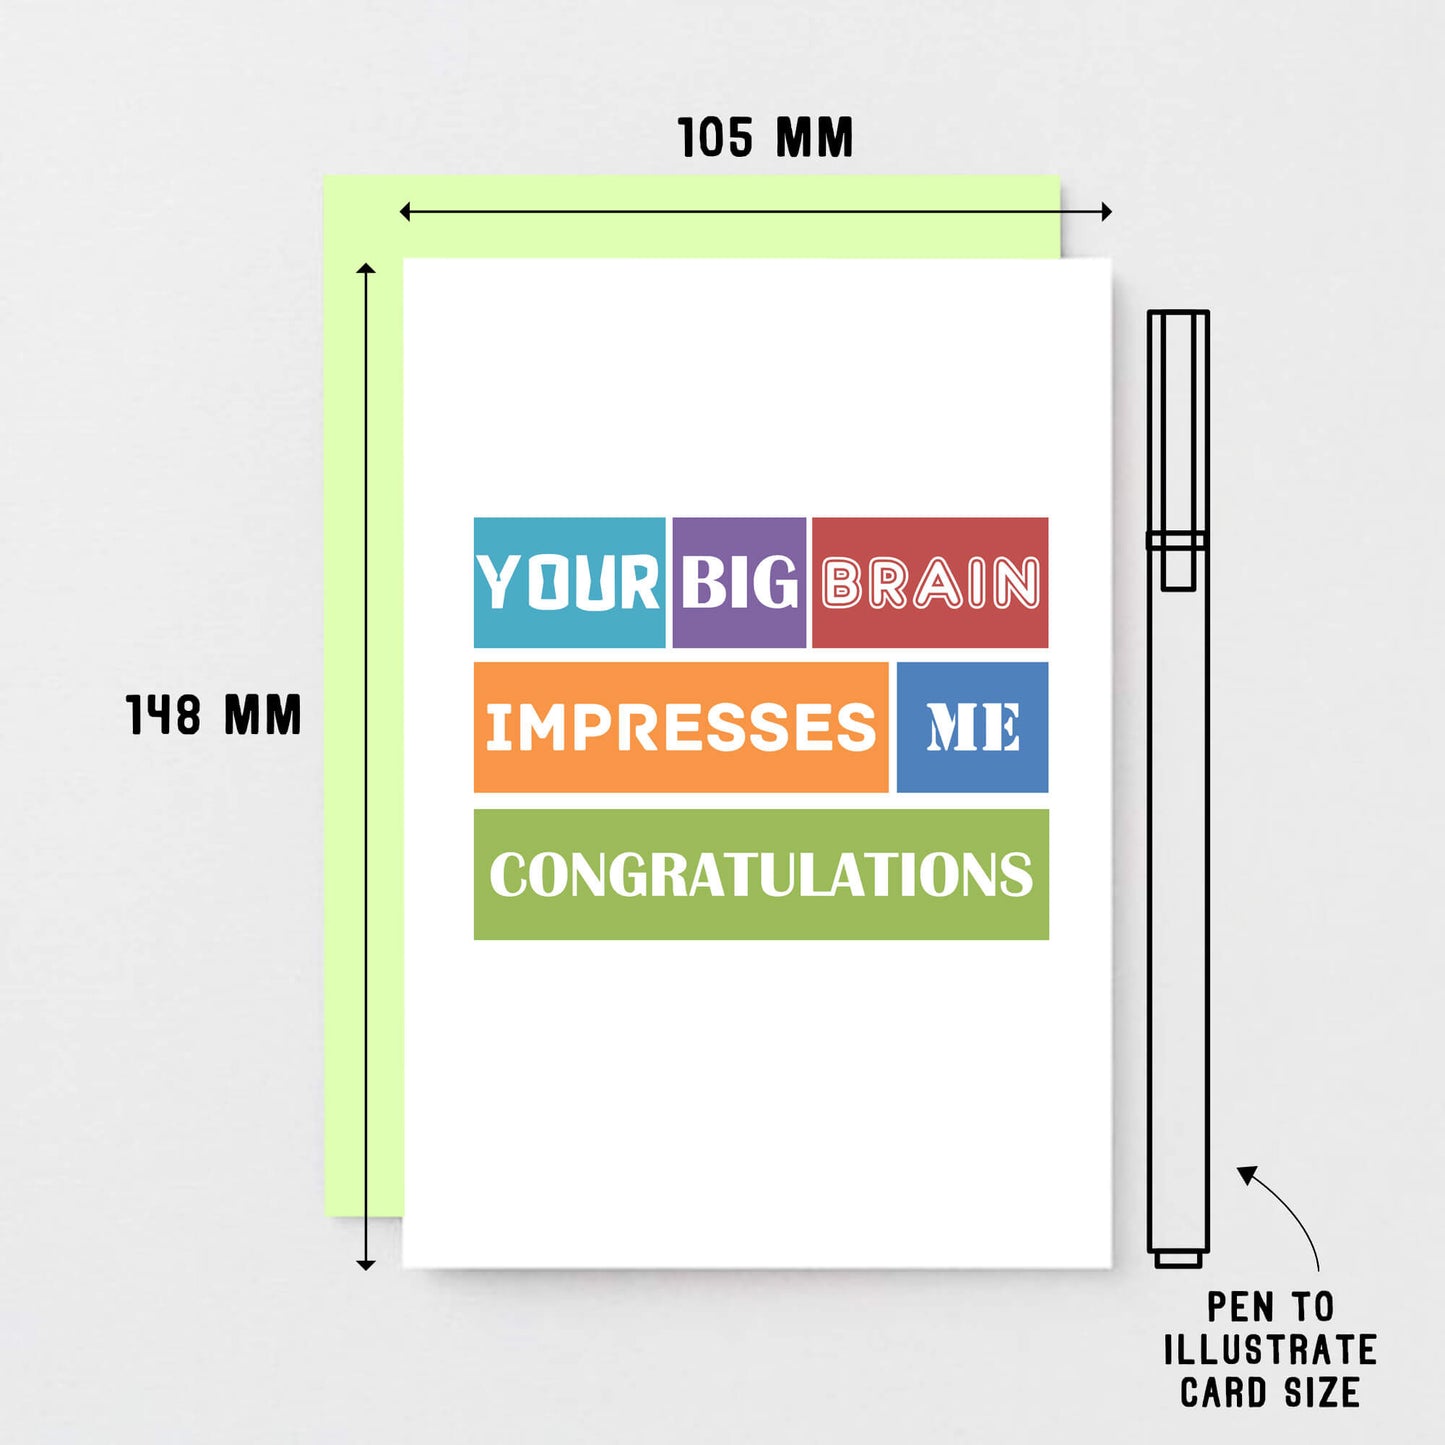 Congratulations Card by SixElevenCreations. Reads Your big brain impresses me. Congratulations. Product Code SE0100A6